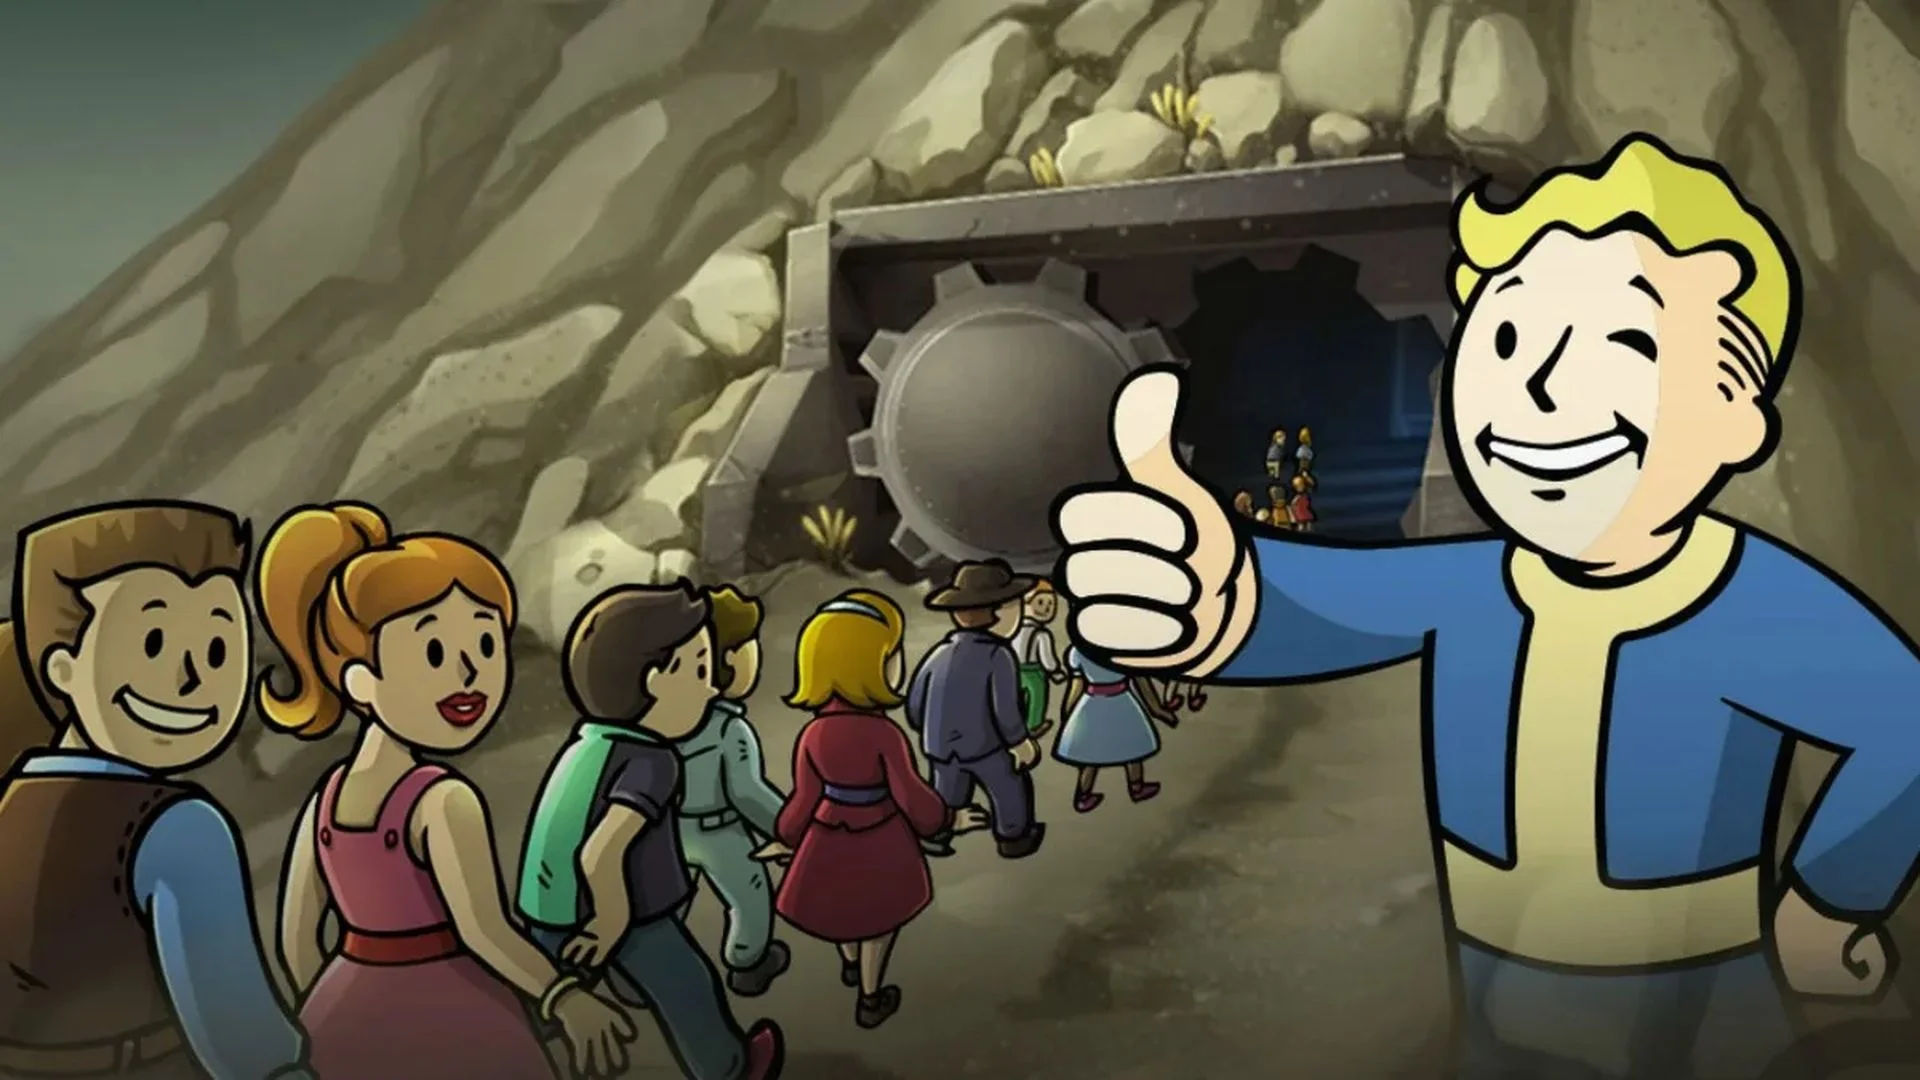 Fallout Shelter's revenue increased several times amid the release of a successful series